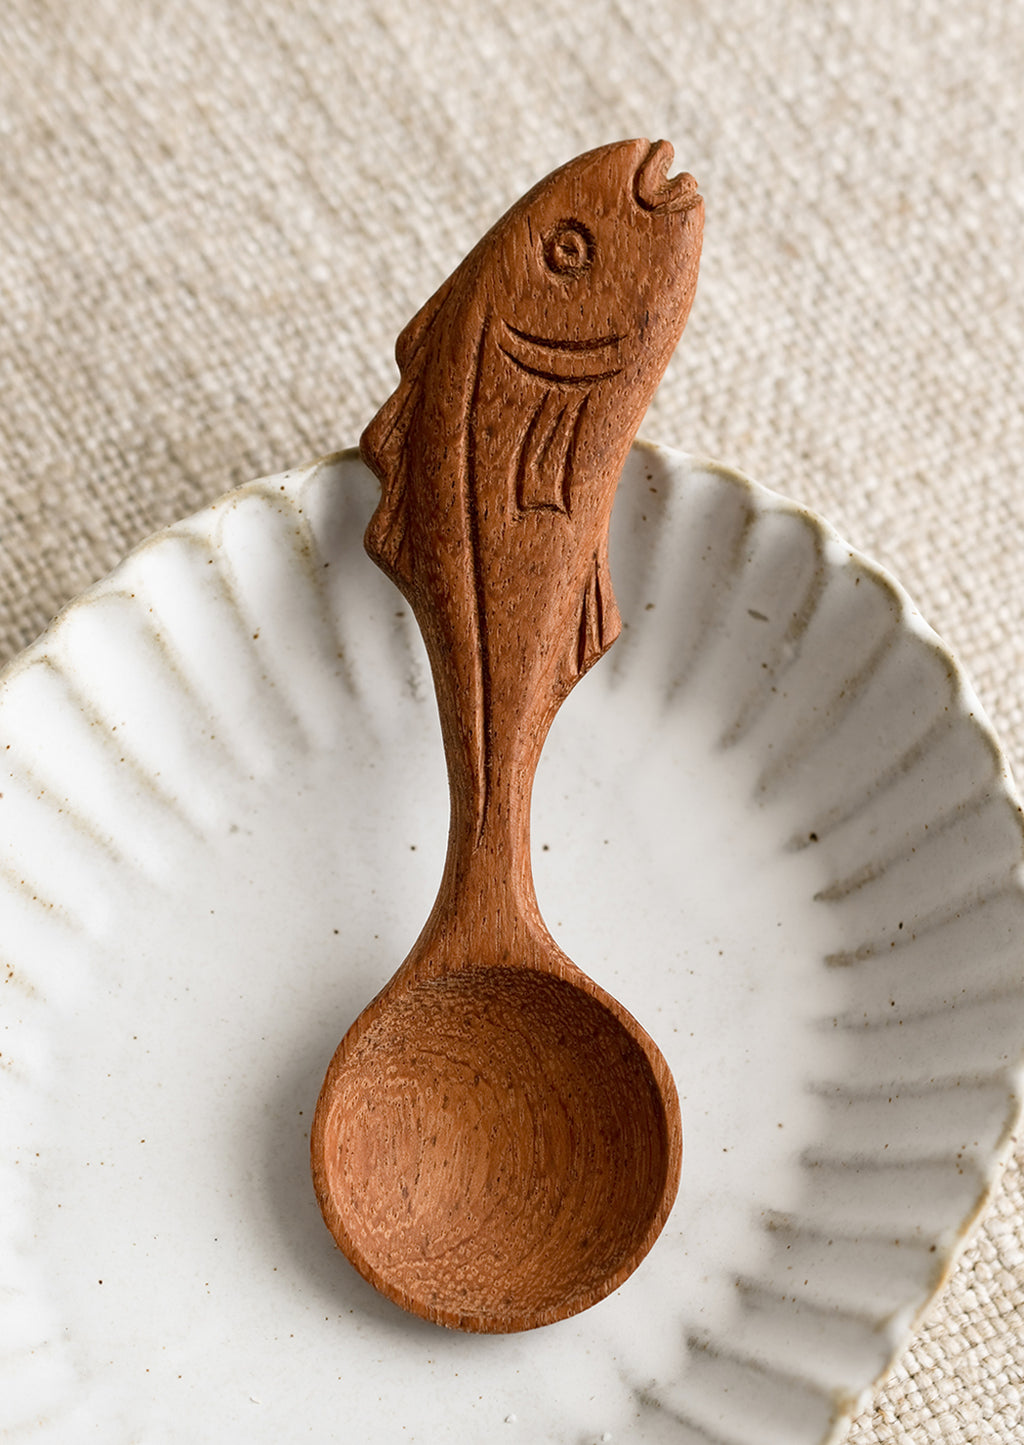 1: A wooden spoon with a handle carved in the shape of a fish.